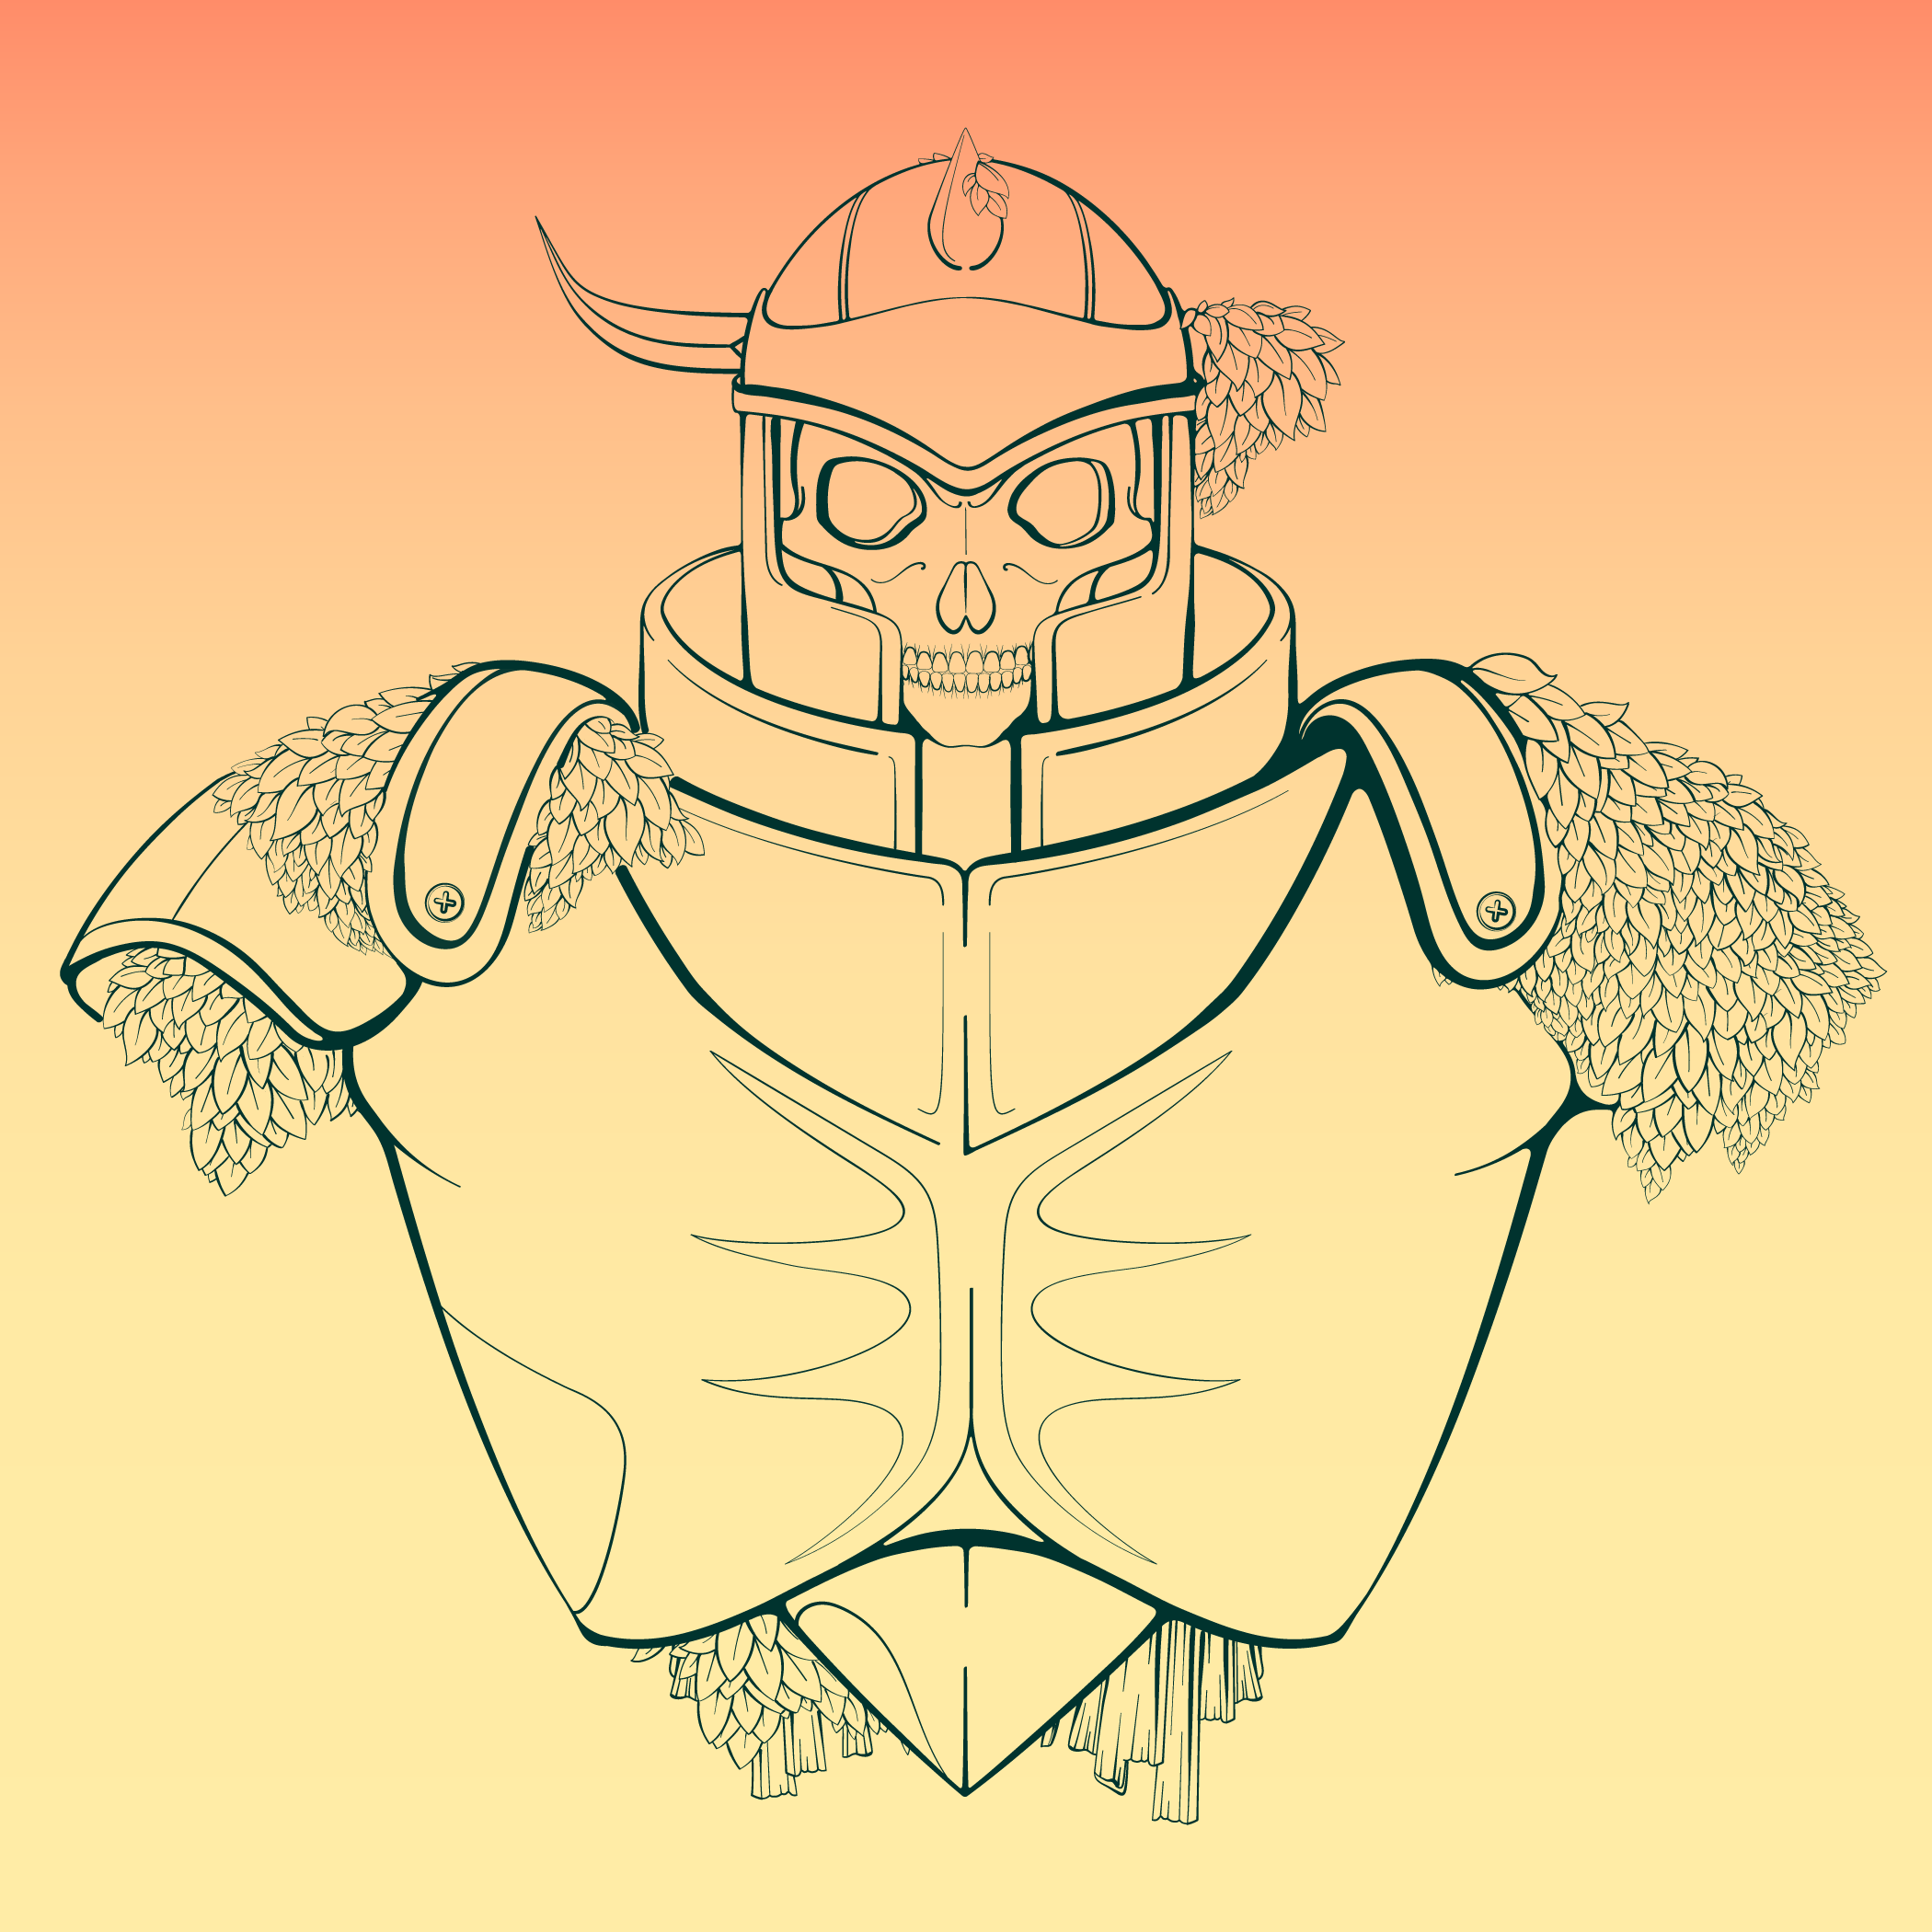 Linework of the Ancient Hero on a warm background